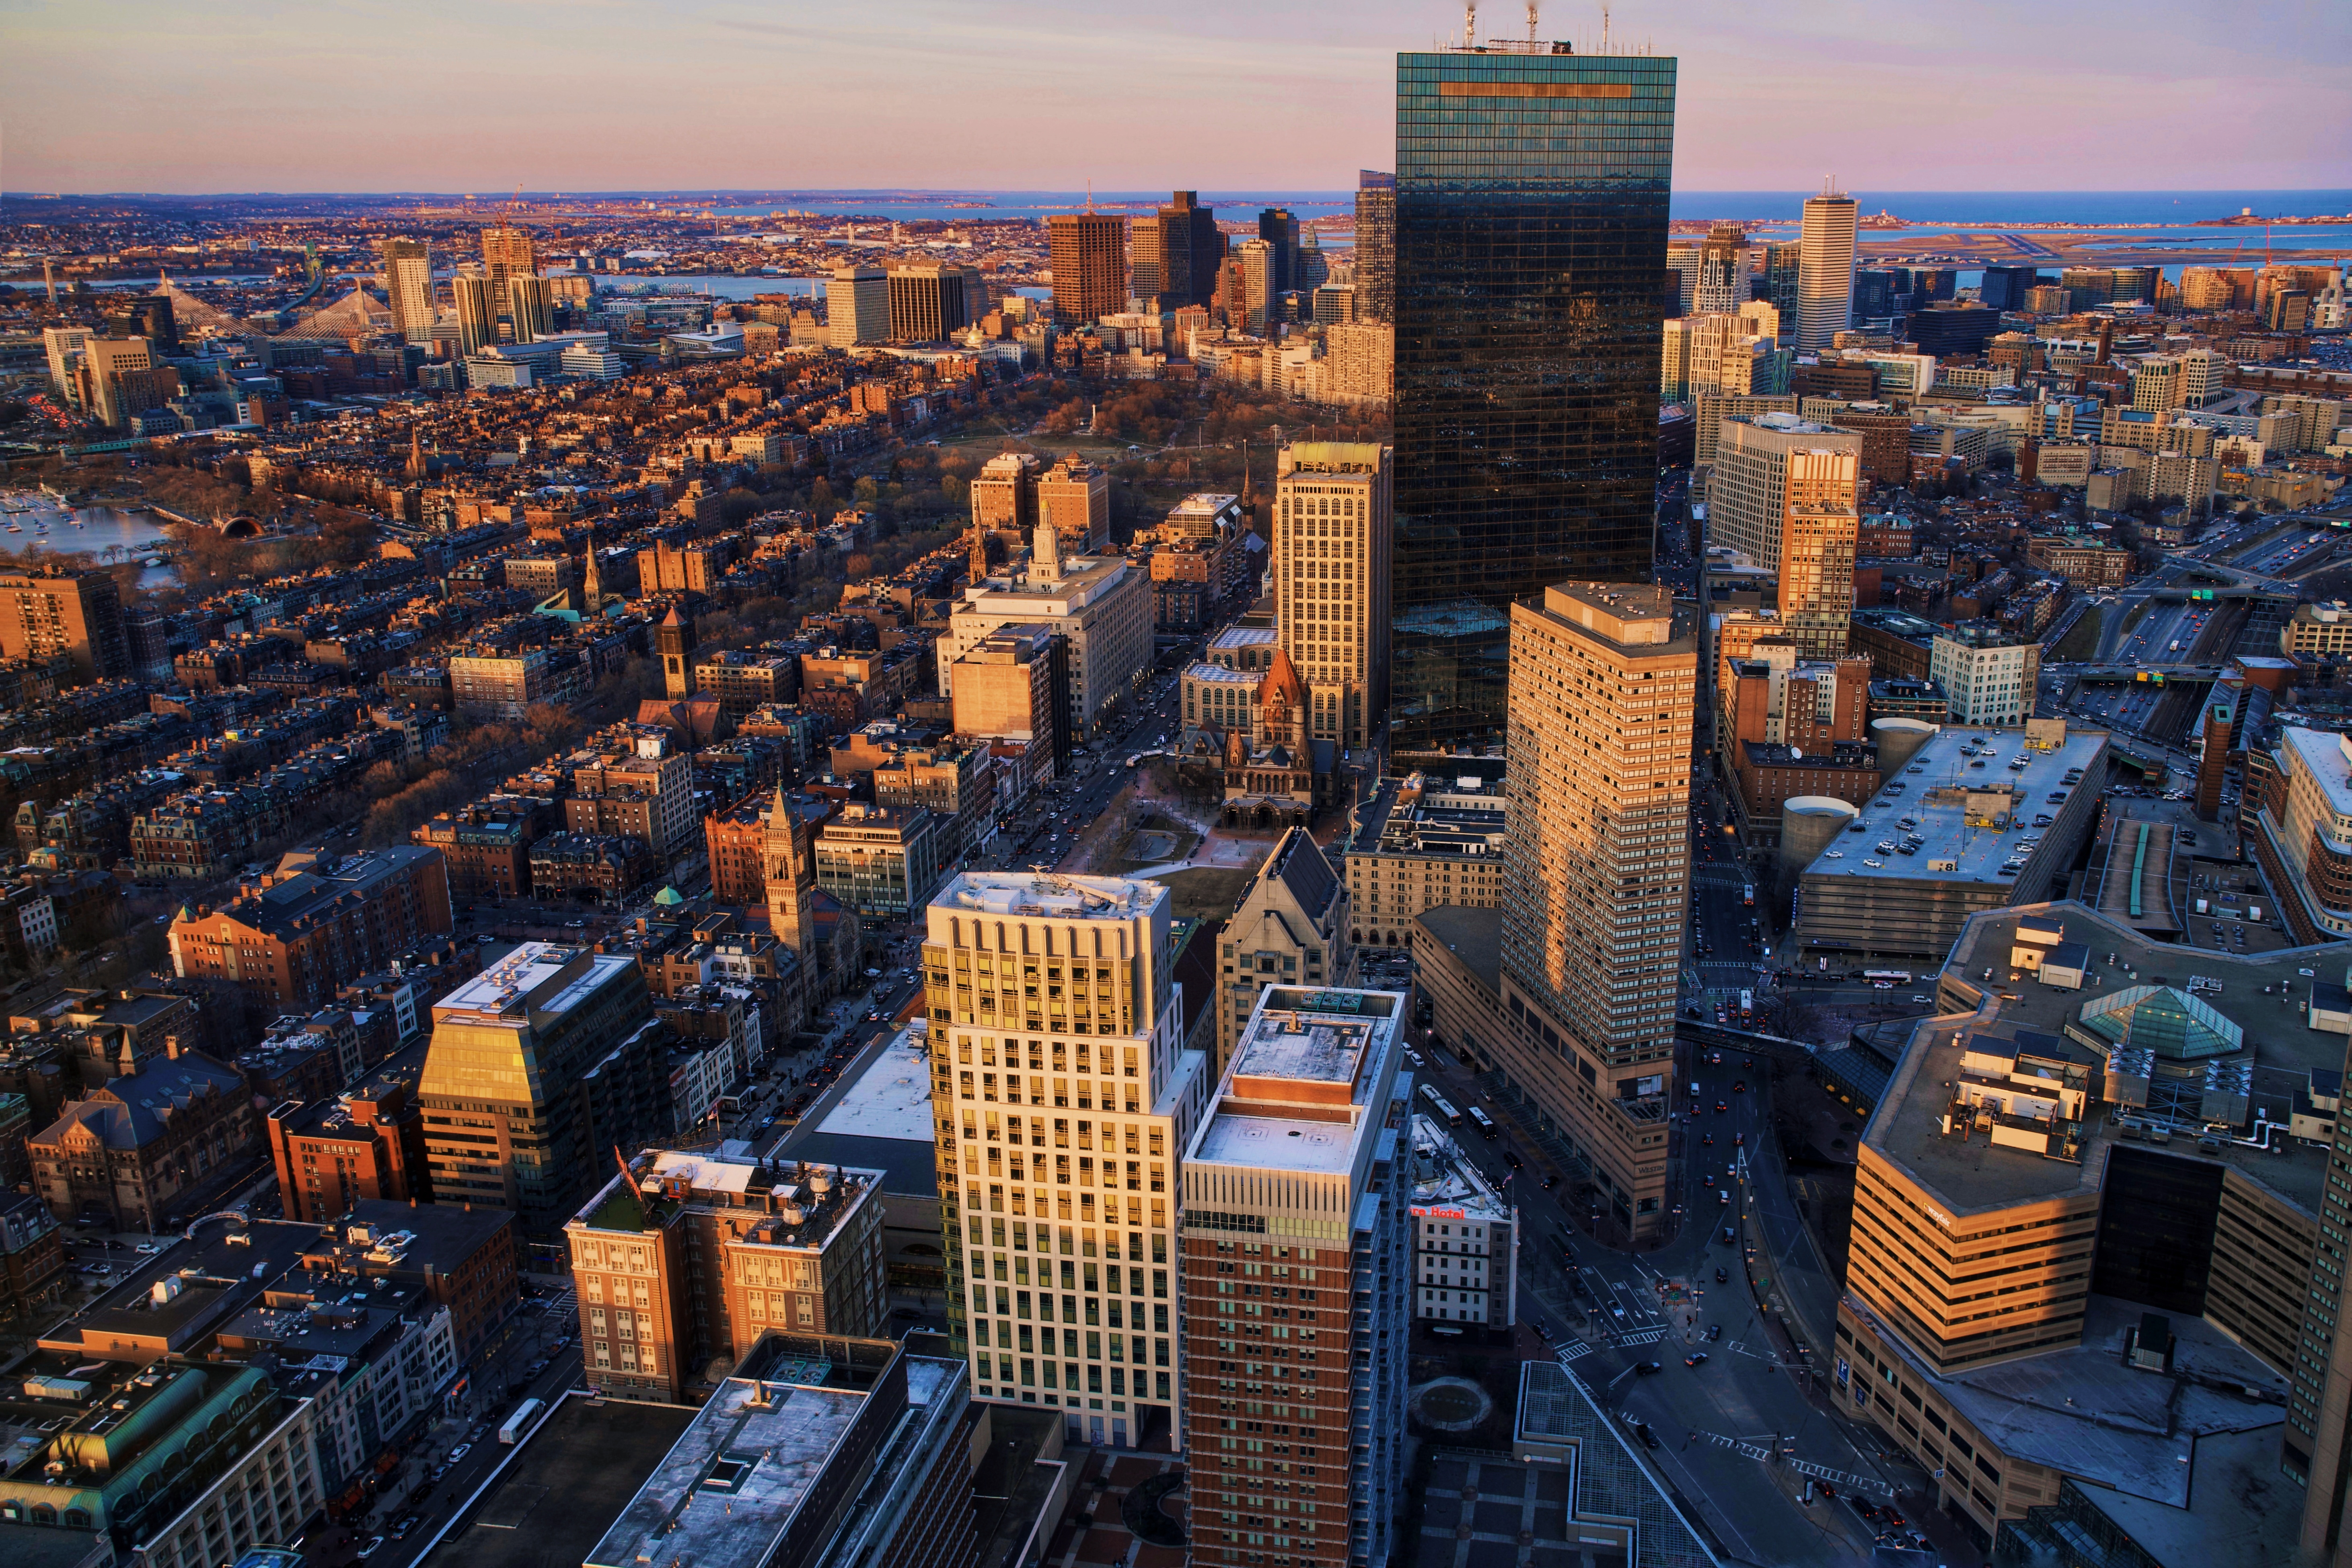 An aerial shot of the Boston skyline and the region beyond at sunset.